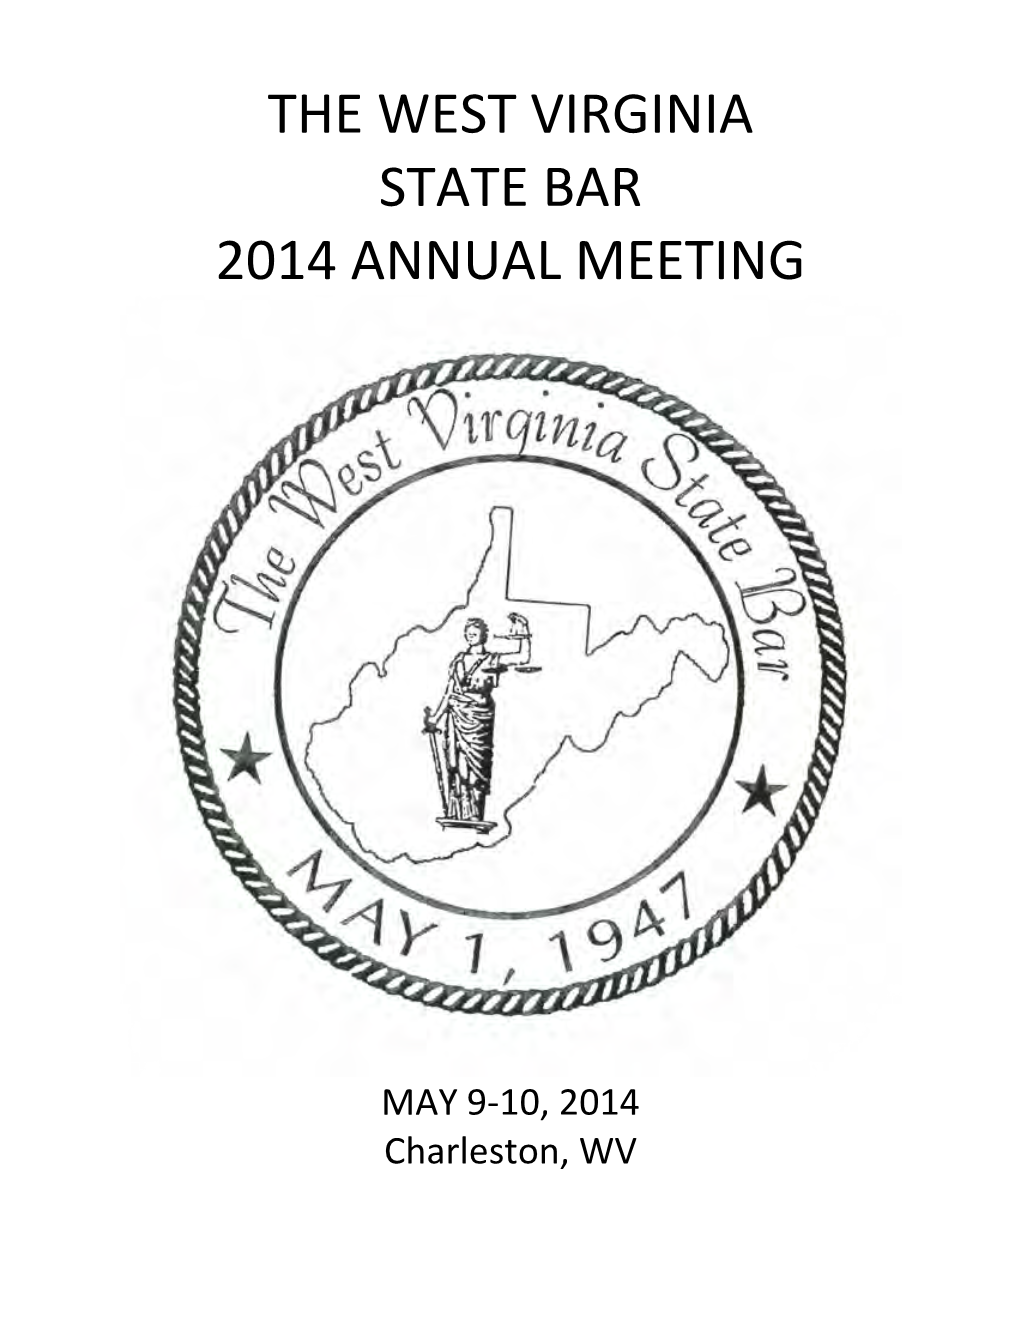 The West Virginia State Bar 2014 Annual Meeting